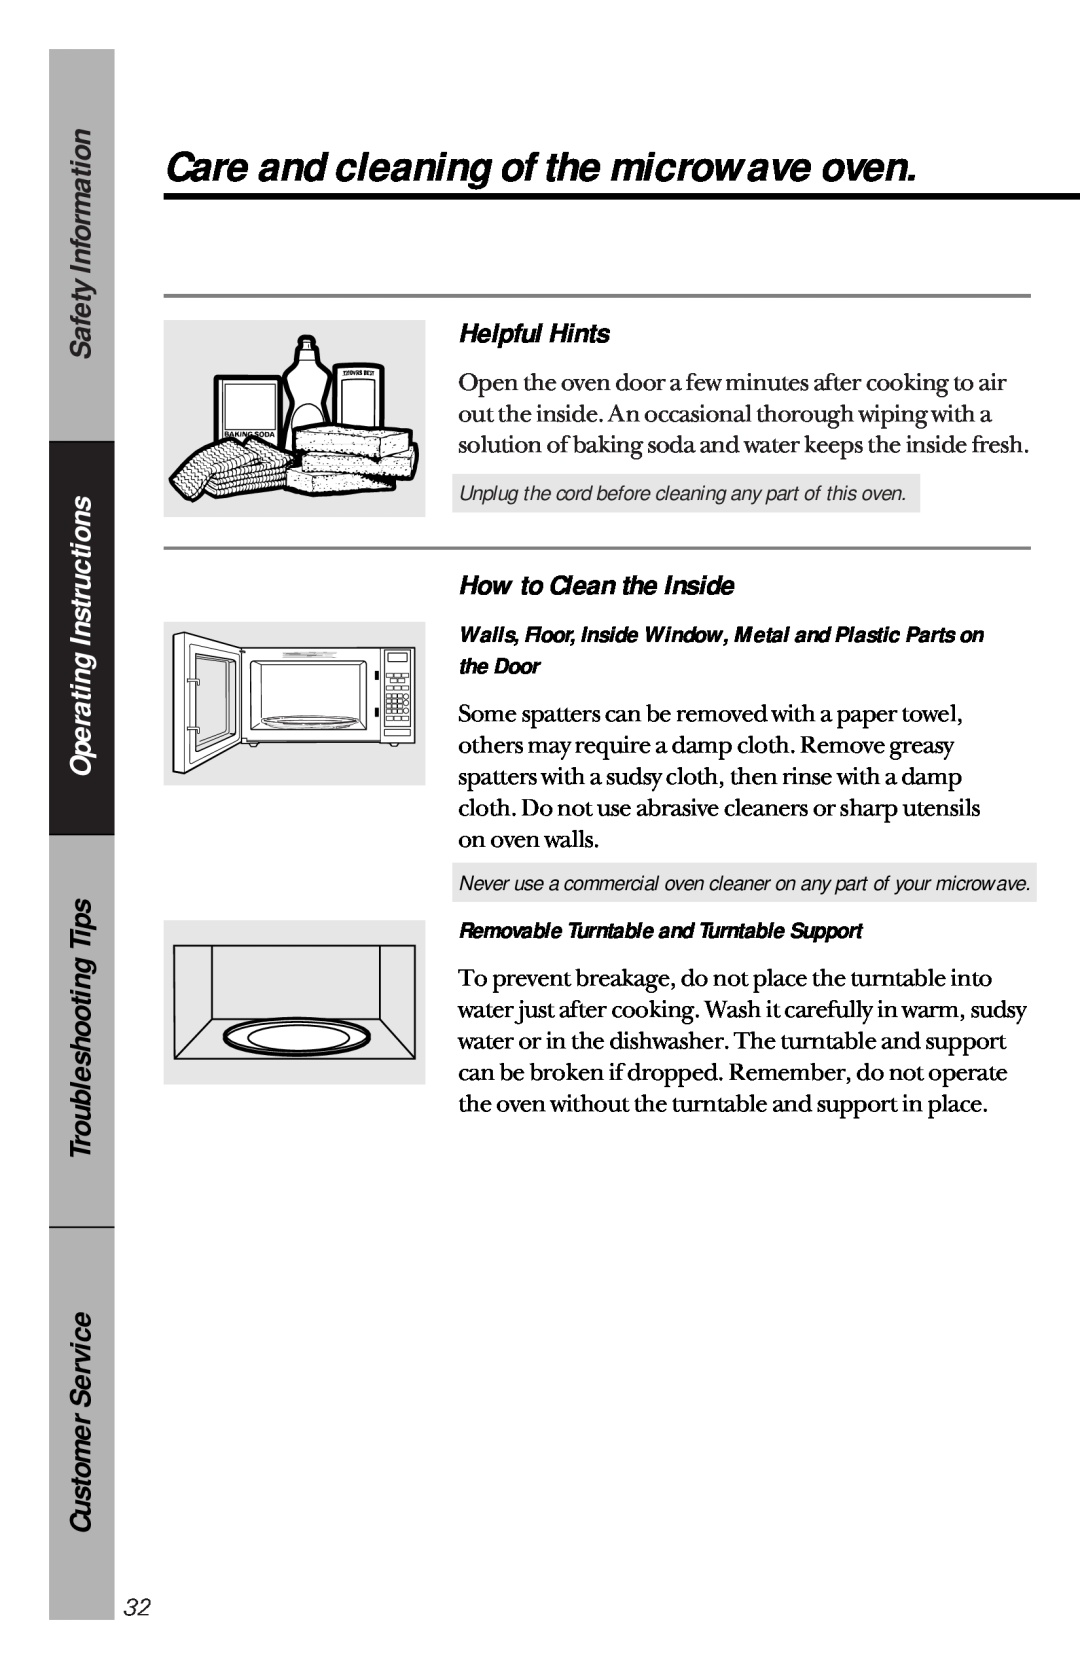 GE je1540 owner manual Helpful Hints, How to Clean the Inside, Care and cleaning of the microwave oven, Safety Information 